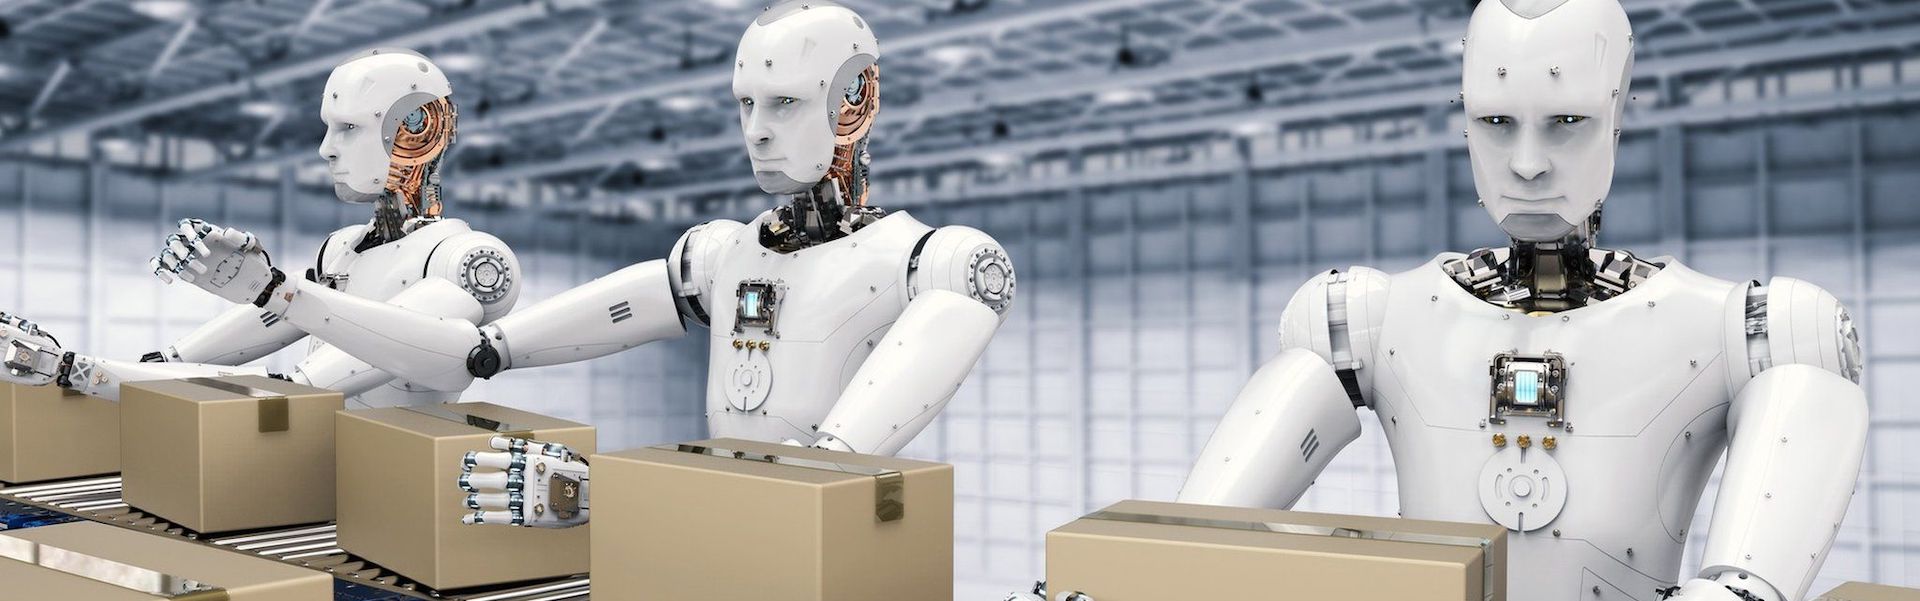 The world should welcome the rise of the robots